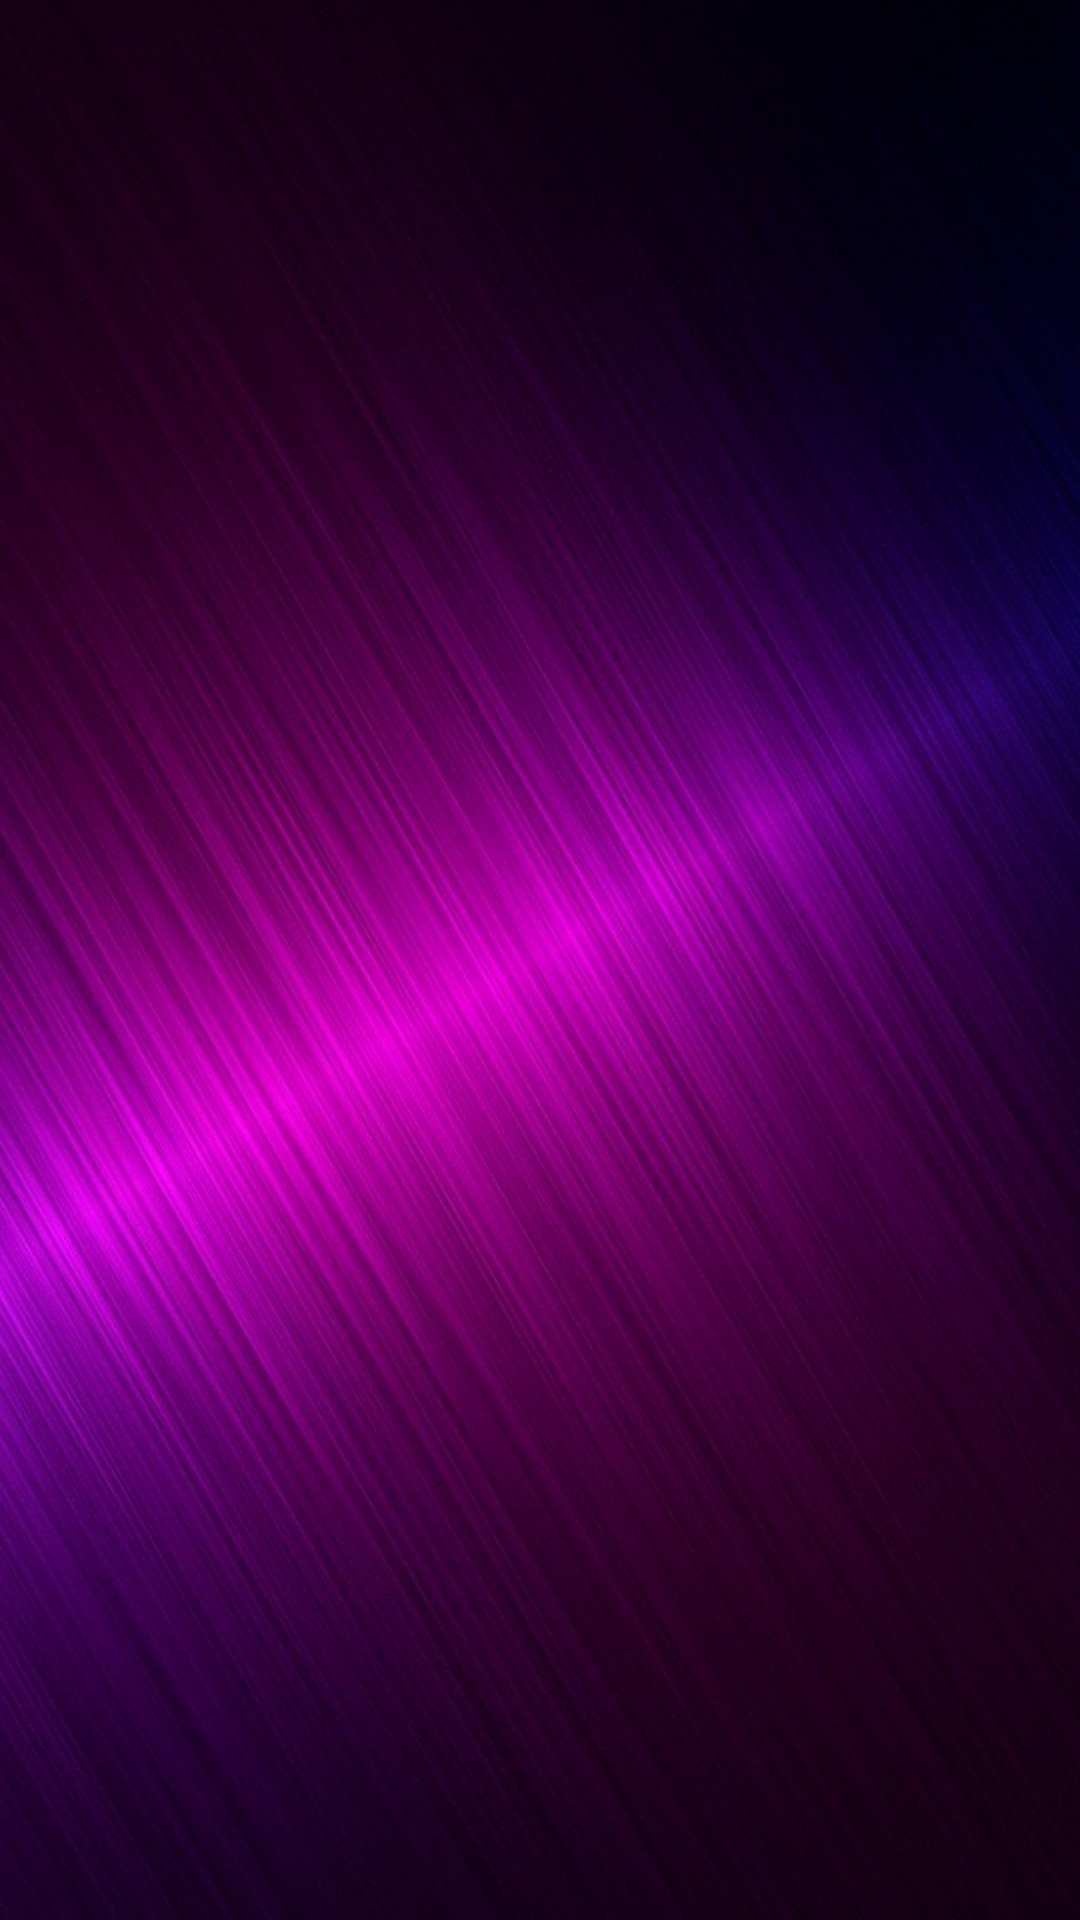 Cute Purple iPhone 7 Wallpaper with high-resolution 1080x1920 pixel. You can use this wallpaper for your iPhone 5, 6, 7, 8, X, XS, XR backgrounds, Mobile Screensaver, or iPad Lock Screen